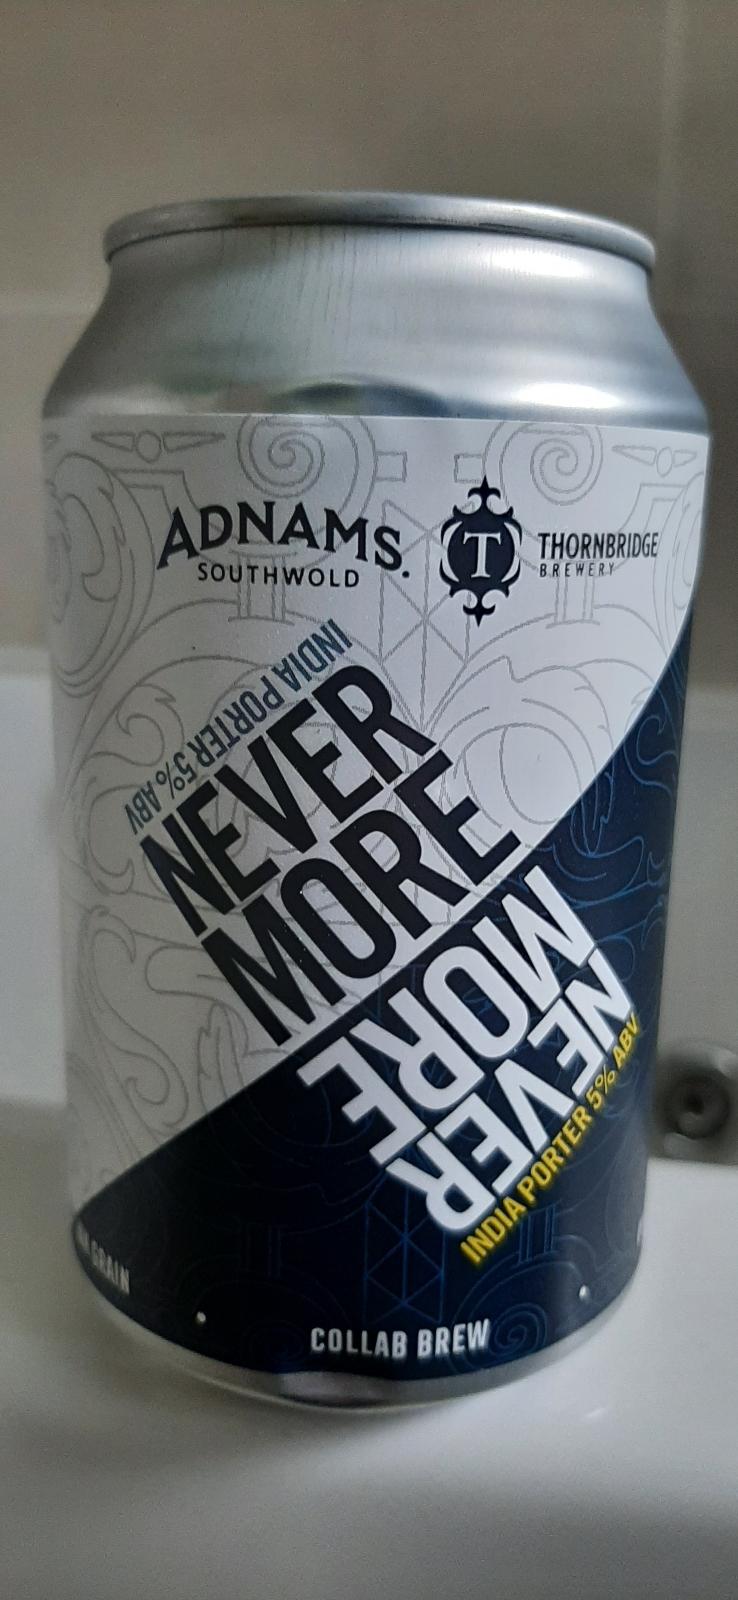 Nevermore (Collaboration with Thornbridge Brewery)